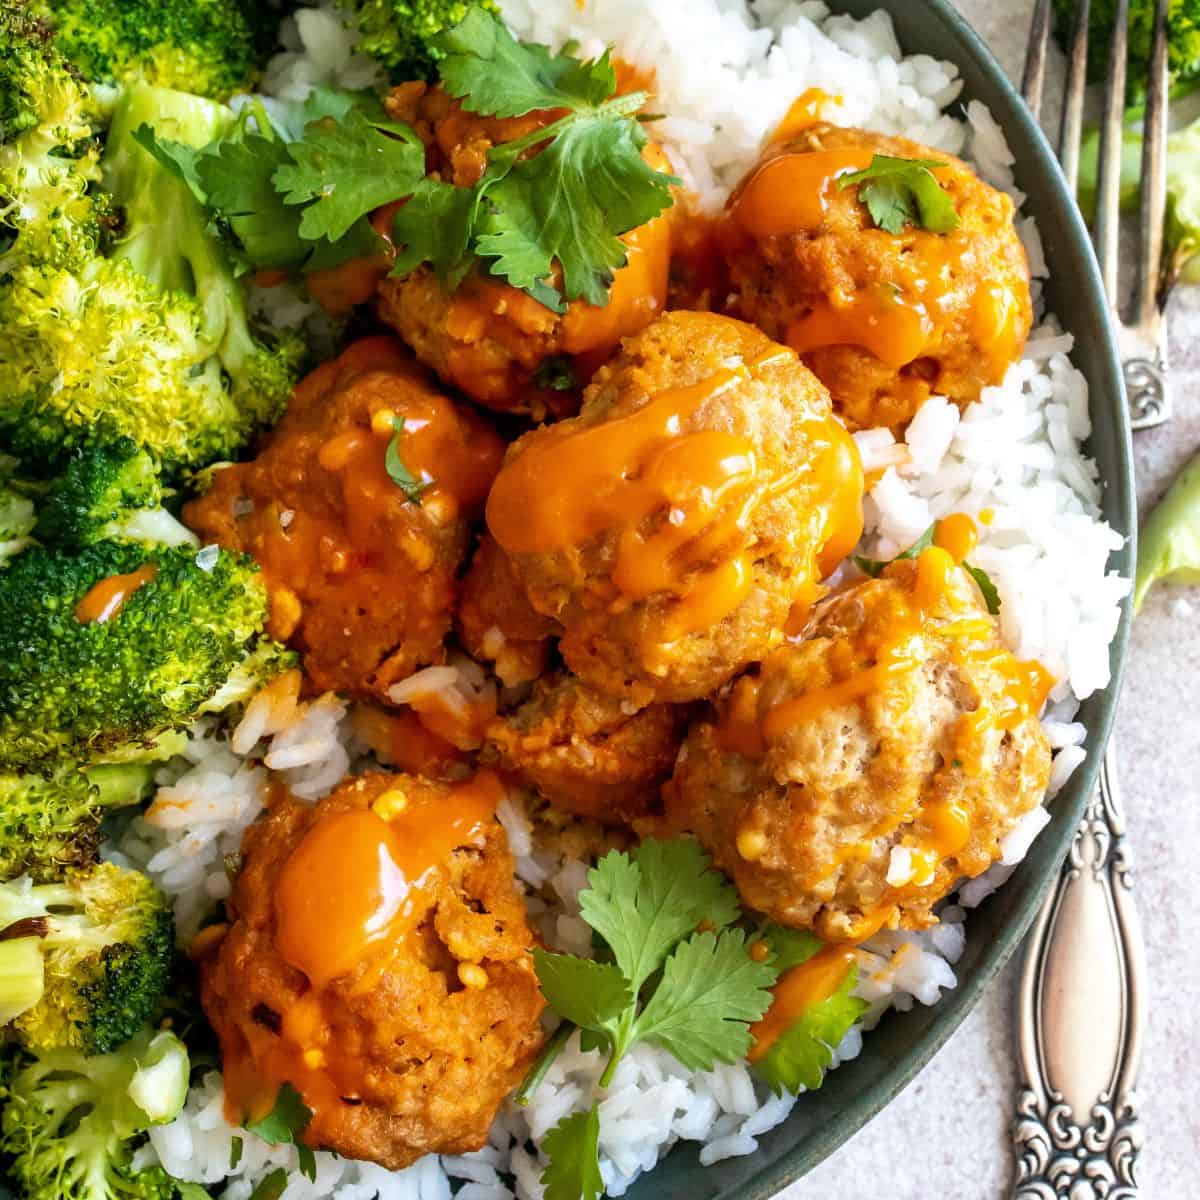 Buffalo meatballs in a bowl on top of rice and a side of broccoli.